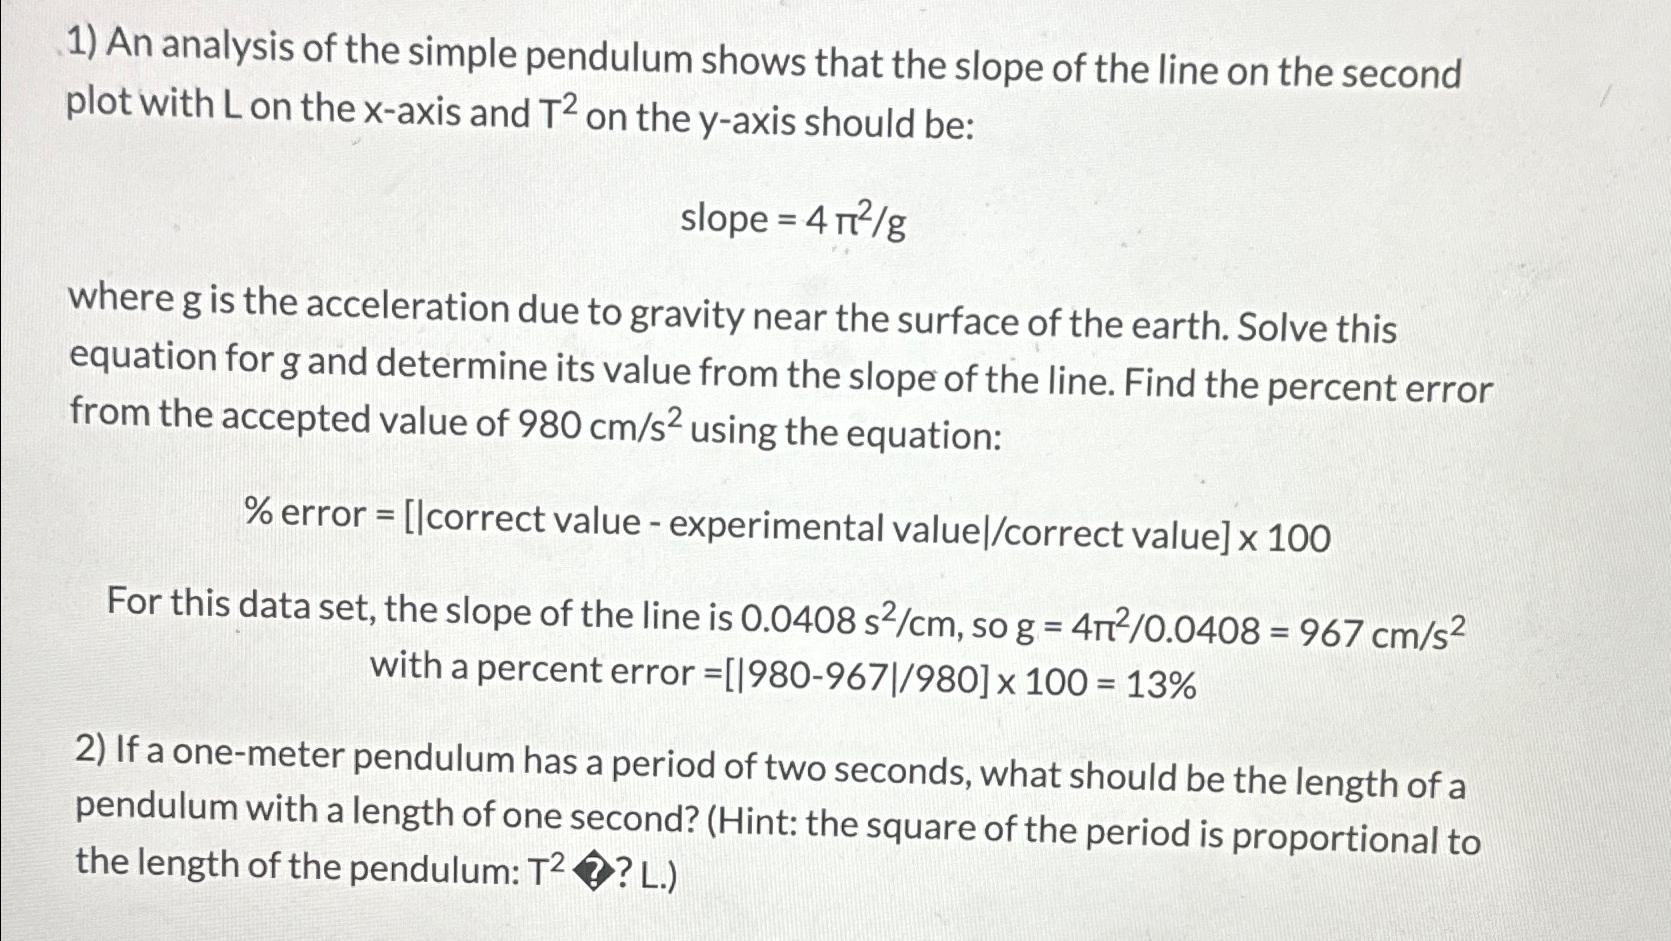 1) An analysis of the simple pendulum shows that the slope of the line on the second plot with L on the